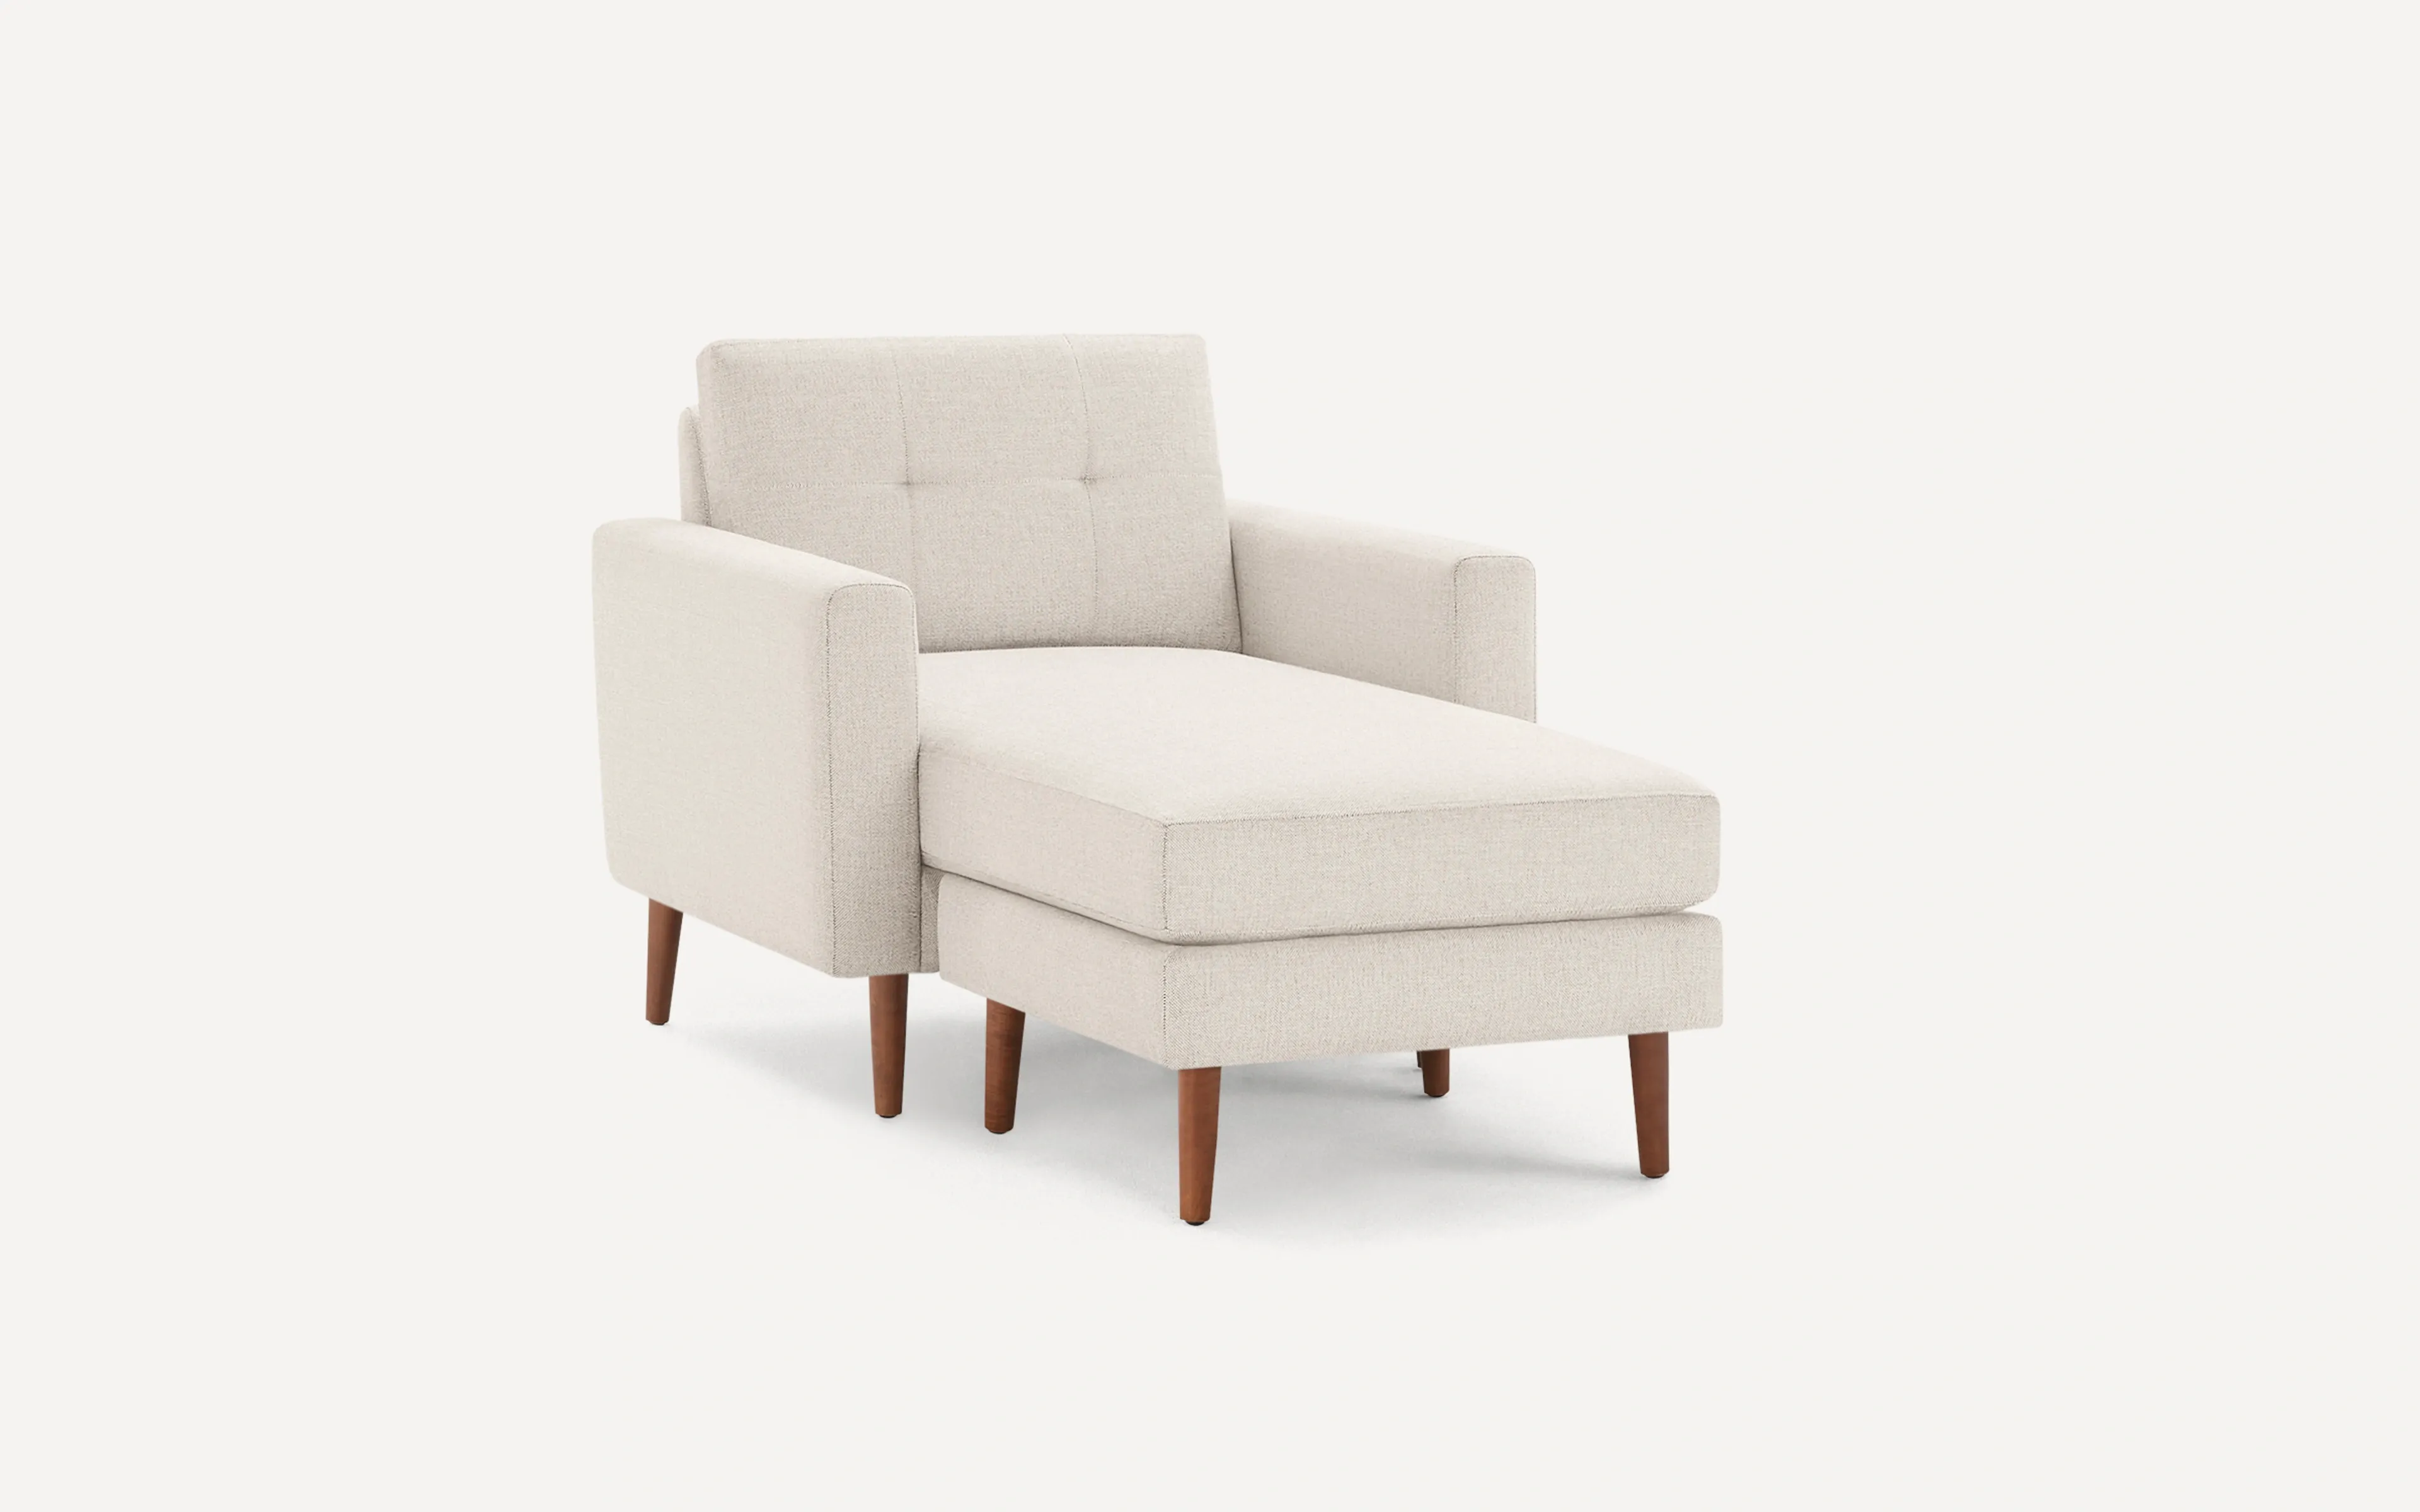 Original Nomad Chaise Armchair in Ivory Fabric